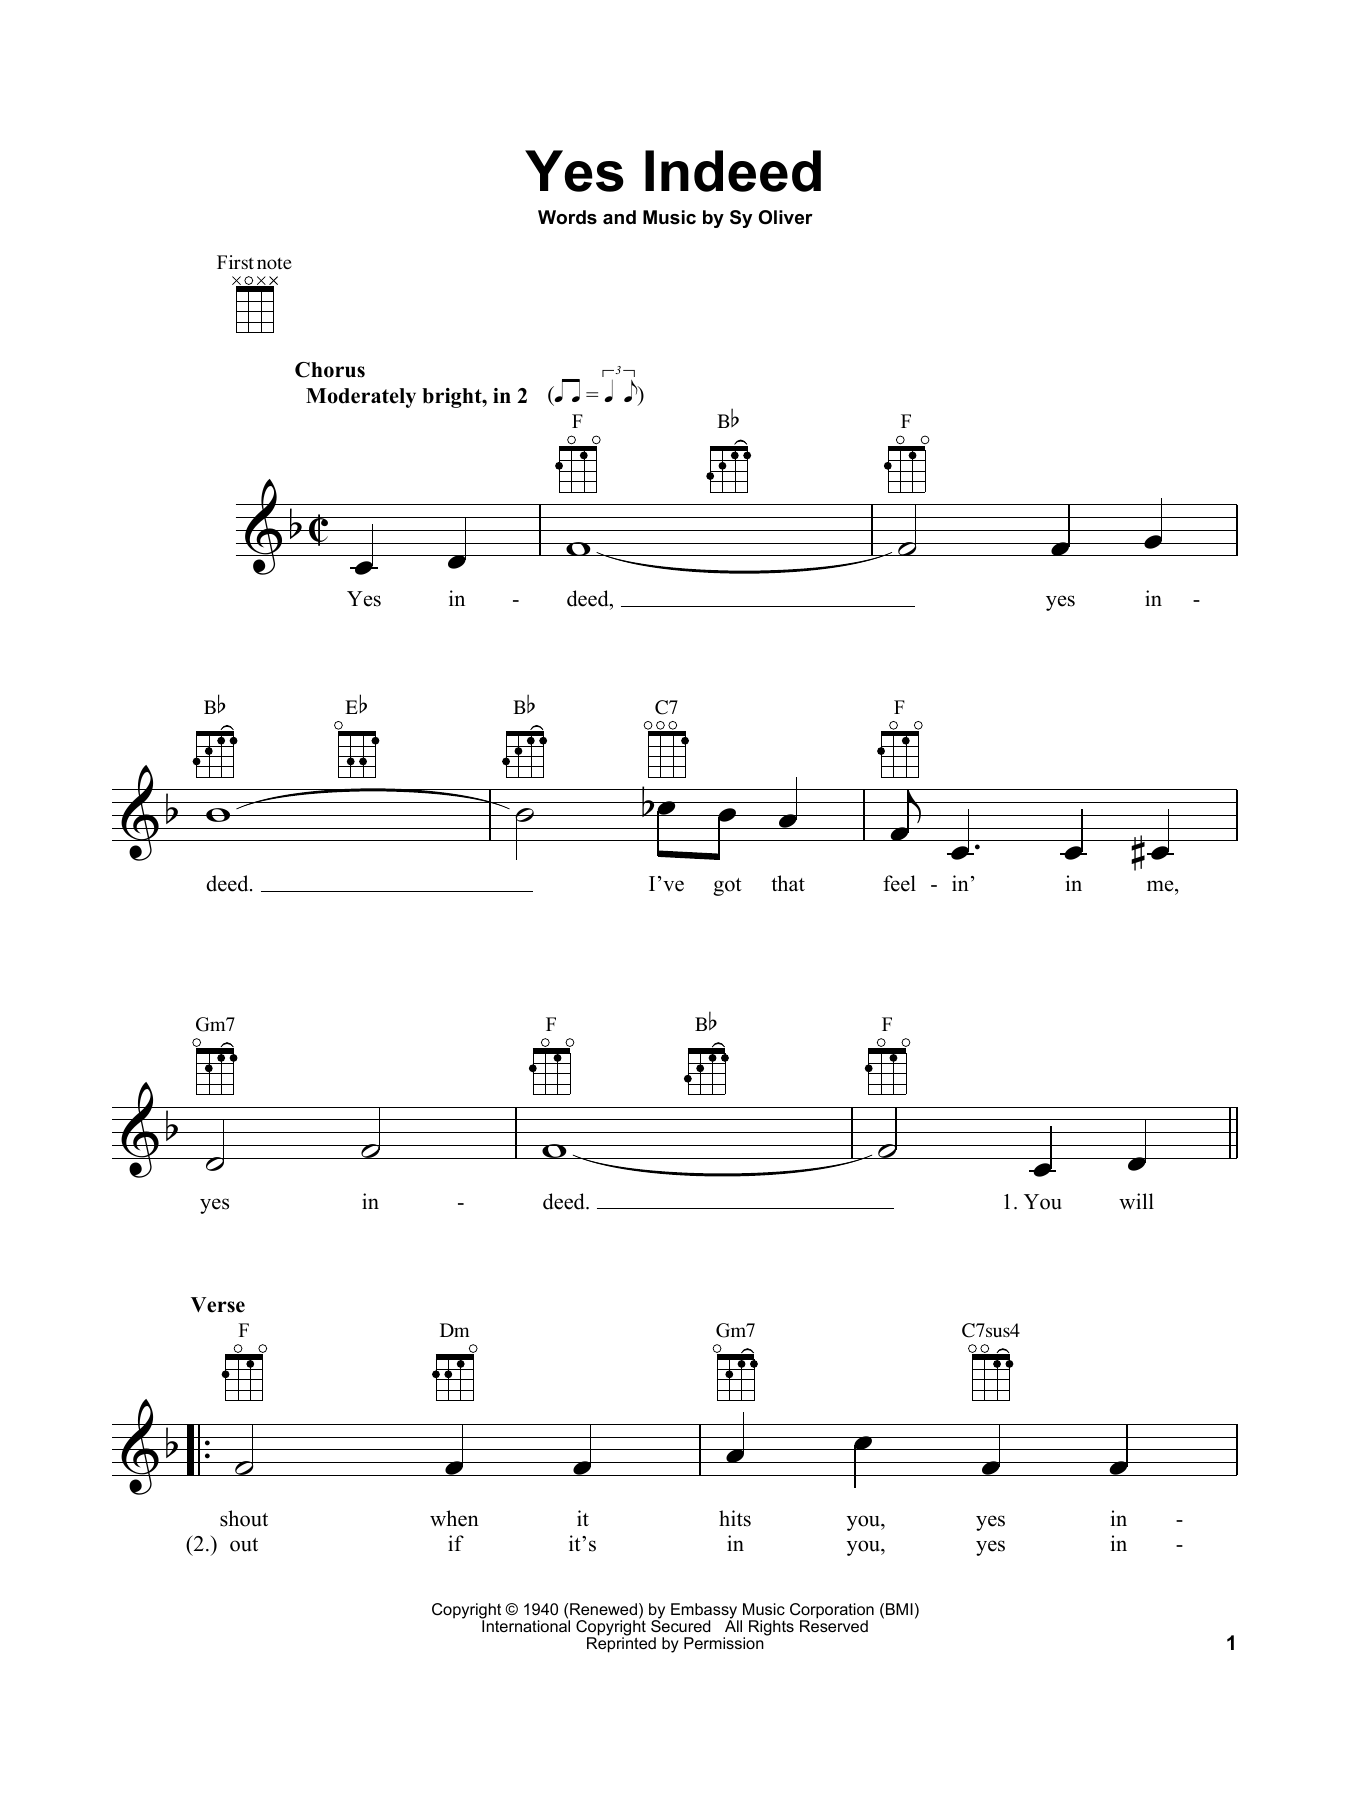 Download Sy Oliver Yes Indeed Sheet Music